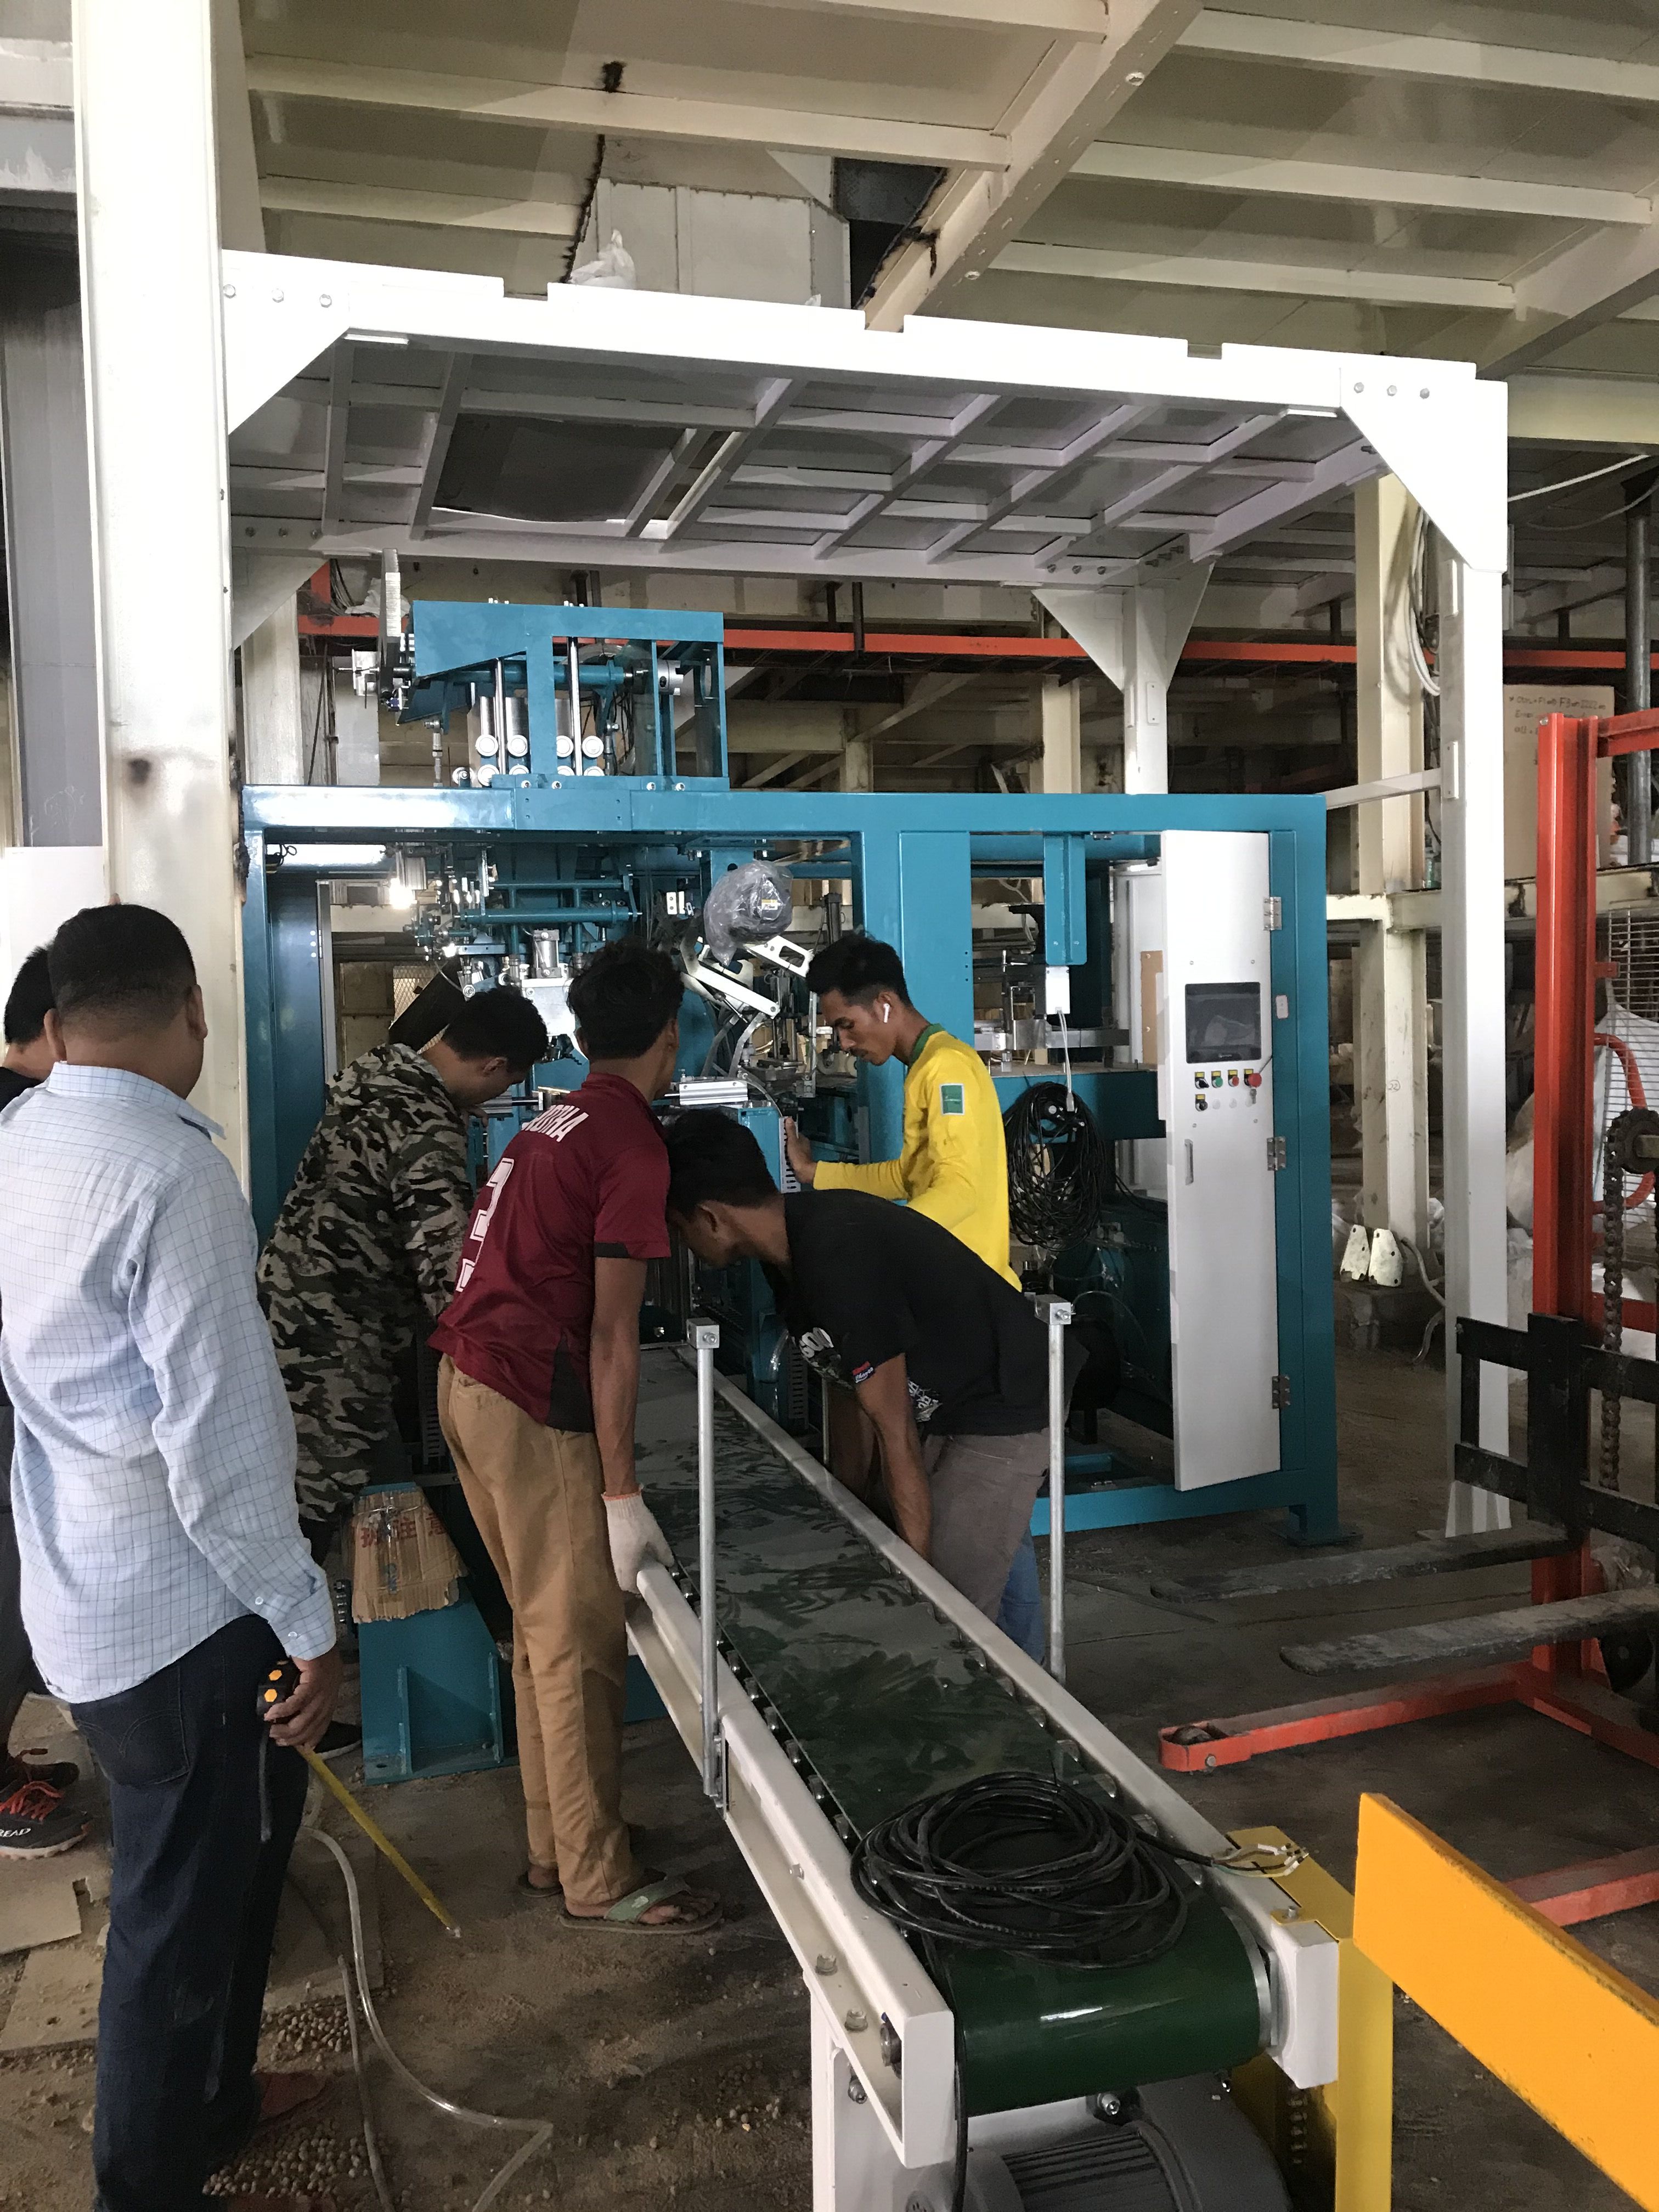 Fully Automatic Packing Palletizing Line,fully automatic American proten powder packaging line,无锡航一机械有限公司 American proten powder fully automatic packaging line